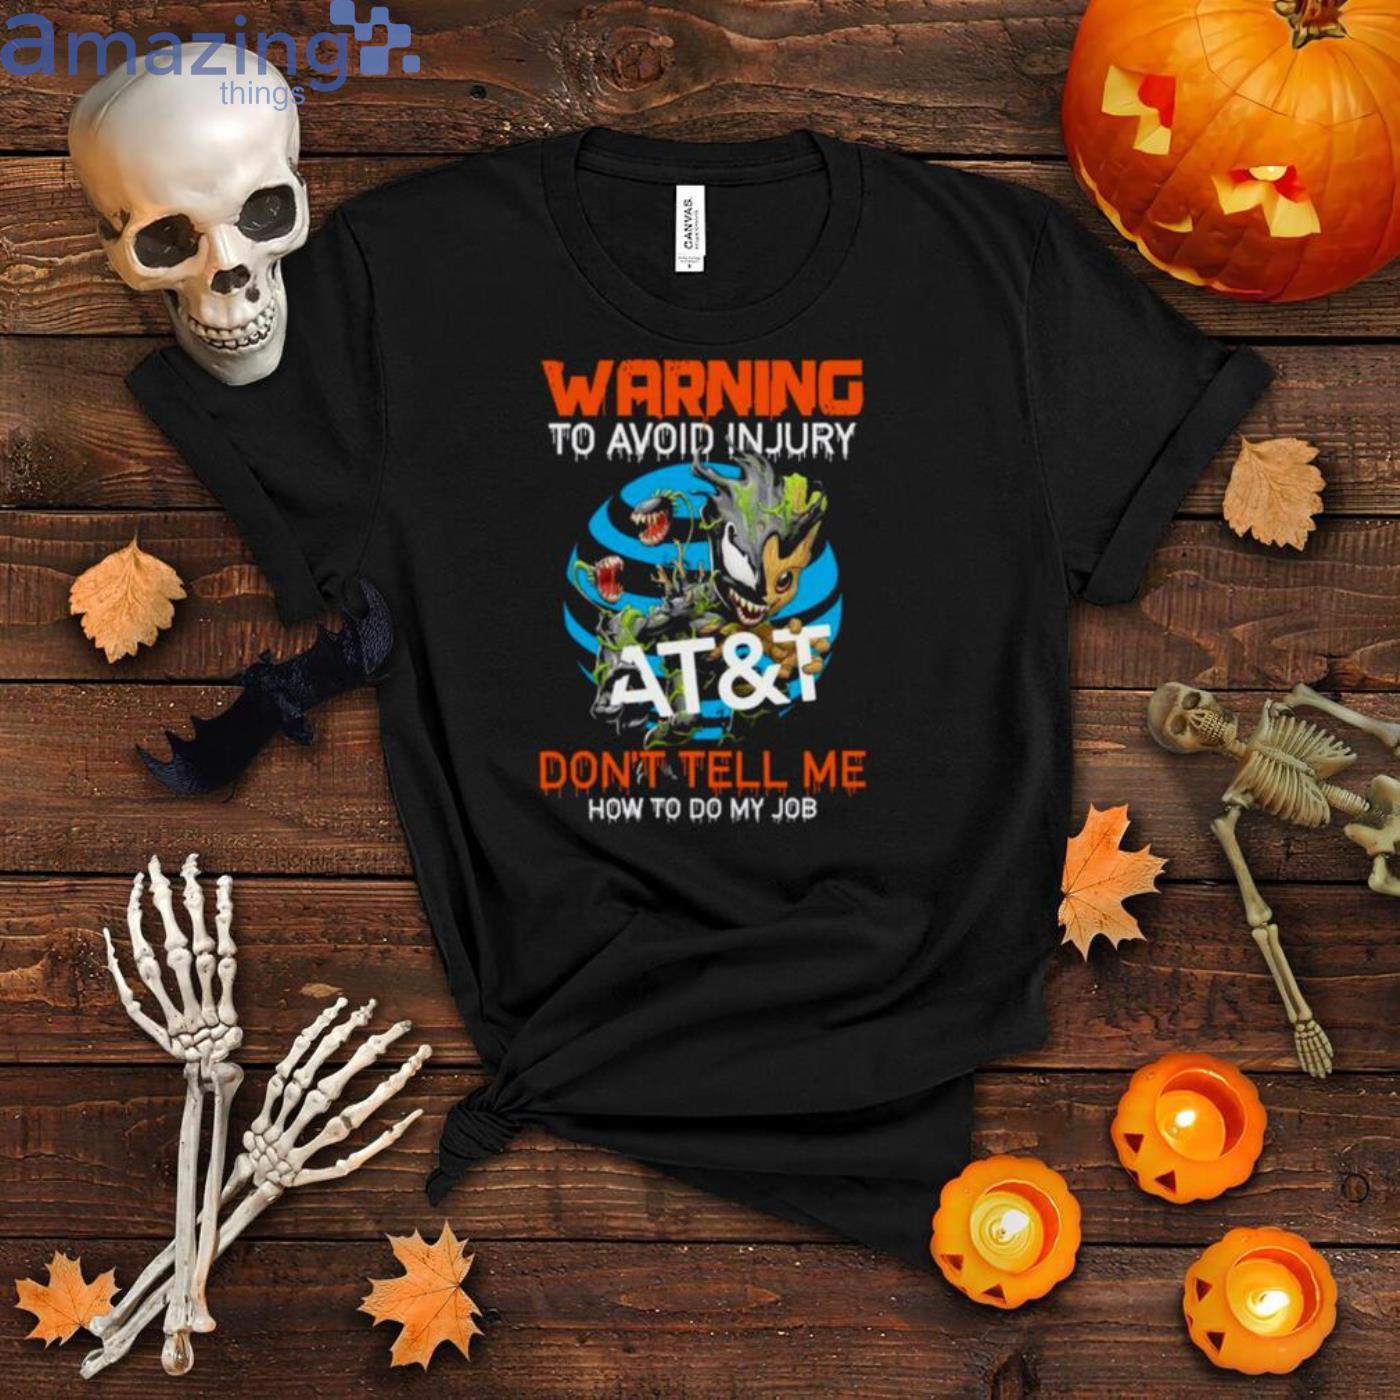 Baby Groot And Venom Warning To Avoid Injury At&t Don't Tell Me How To Do My Job Shirt Product Photo 1